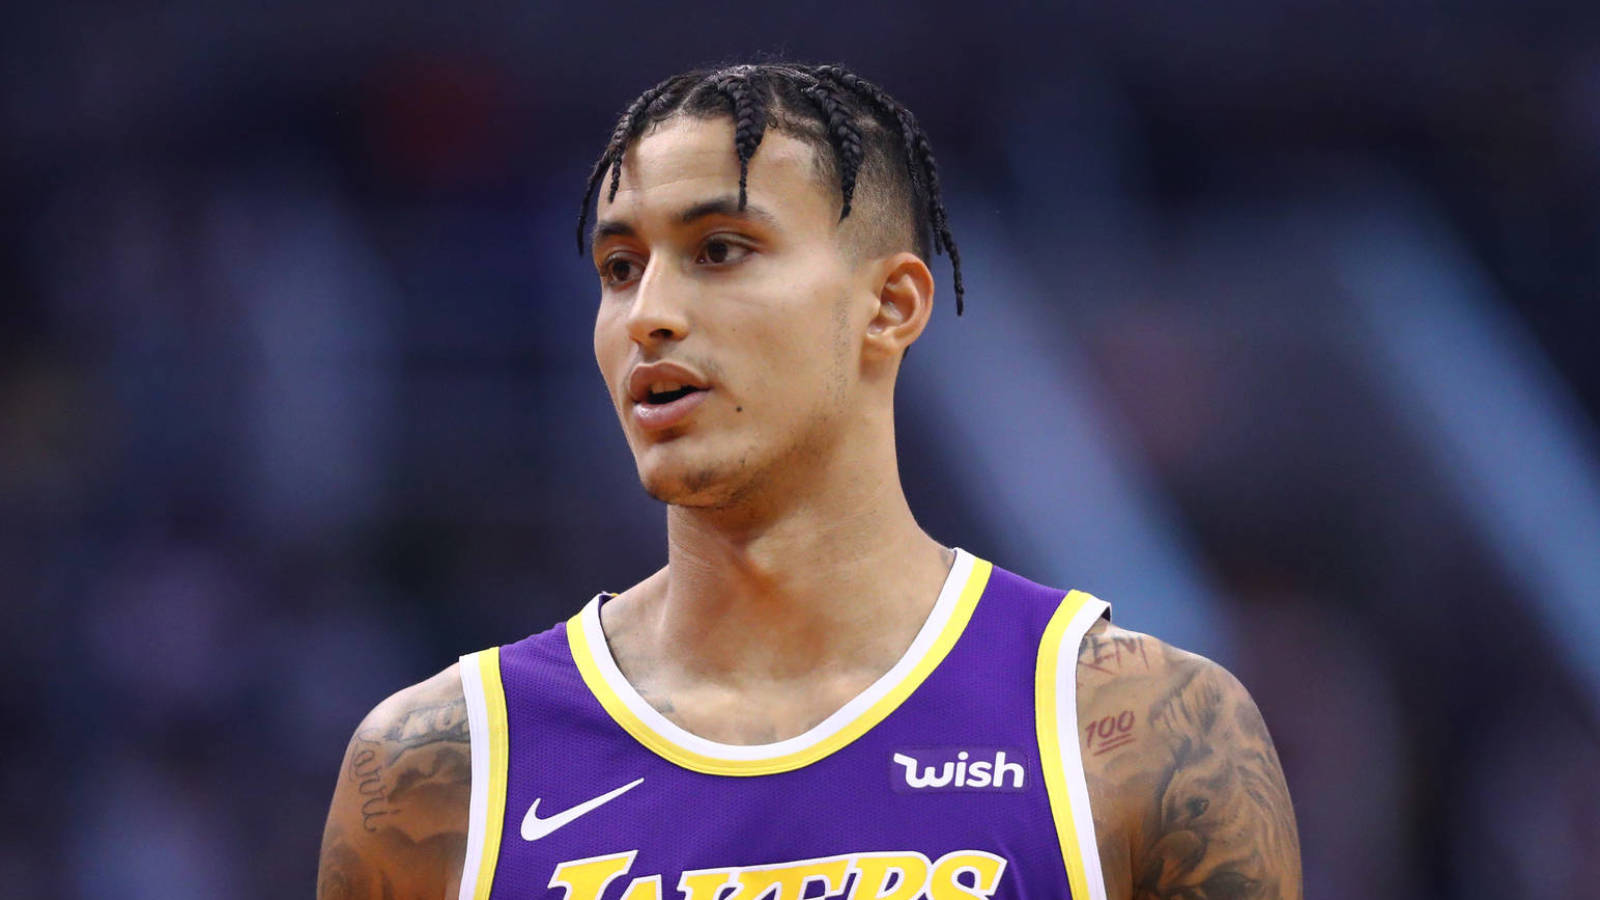 Watch: Lakers roast Kyle Kuzma for wild Christmas outfit and haircut